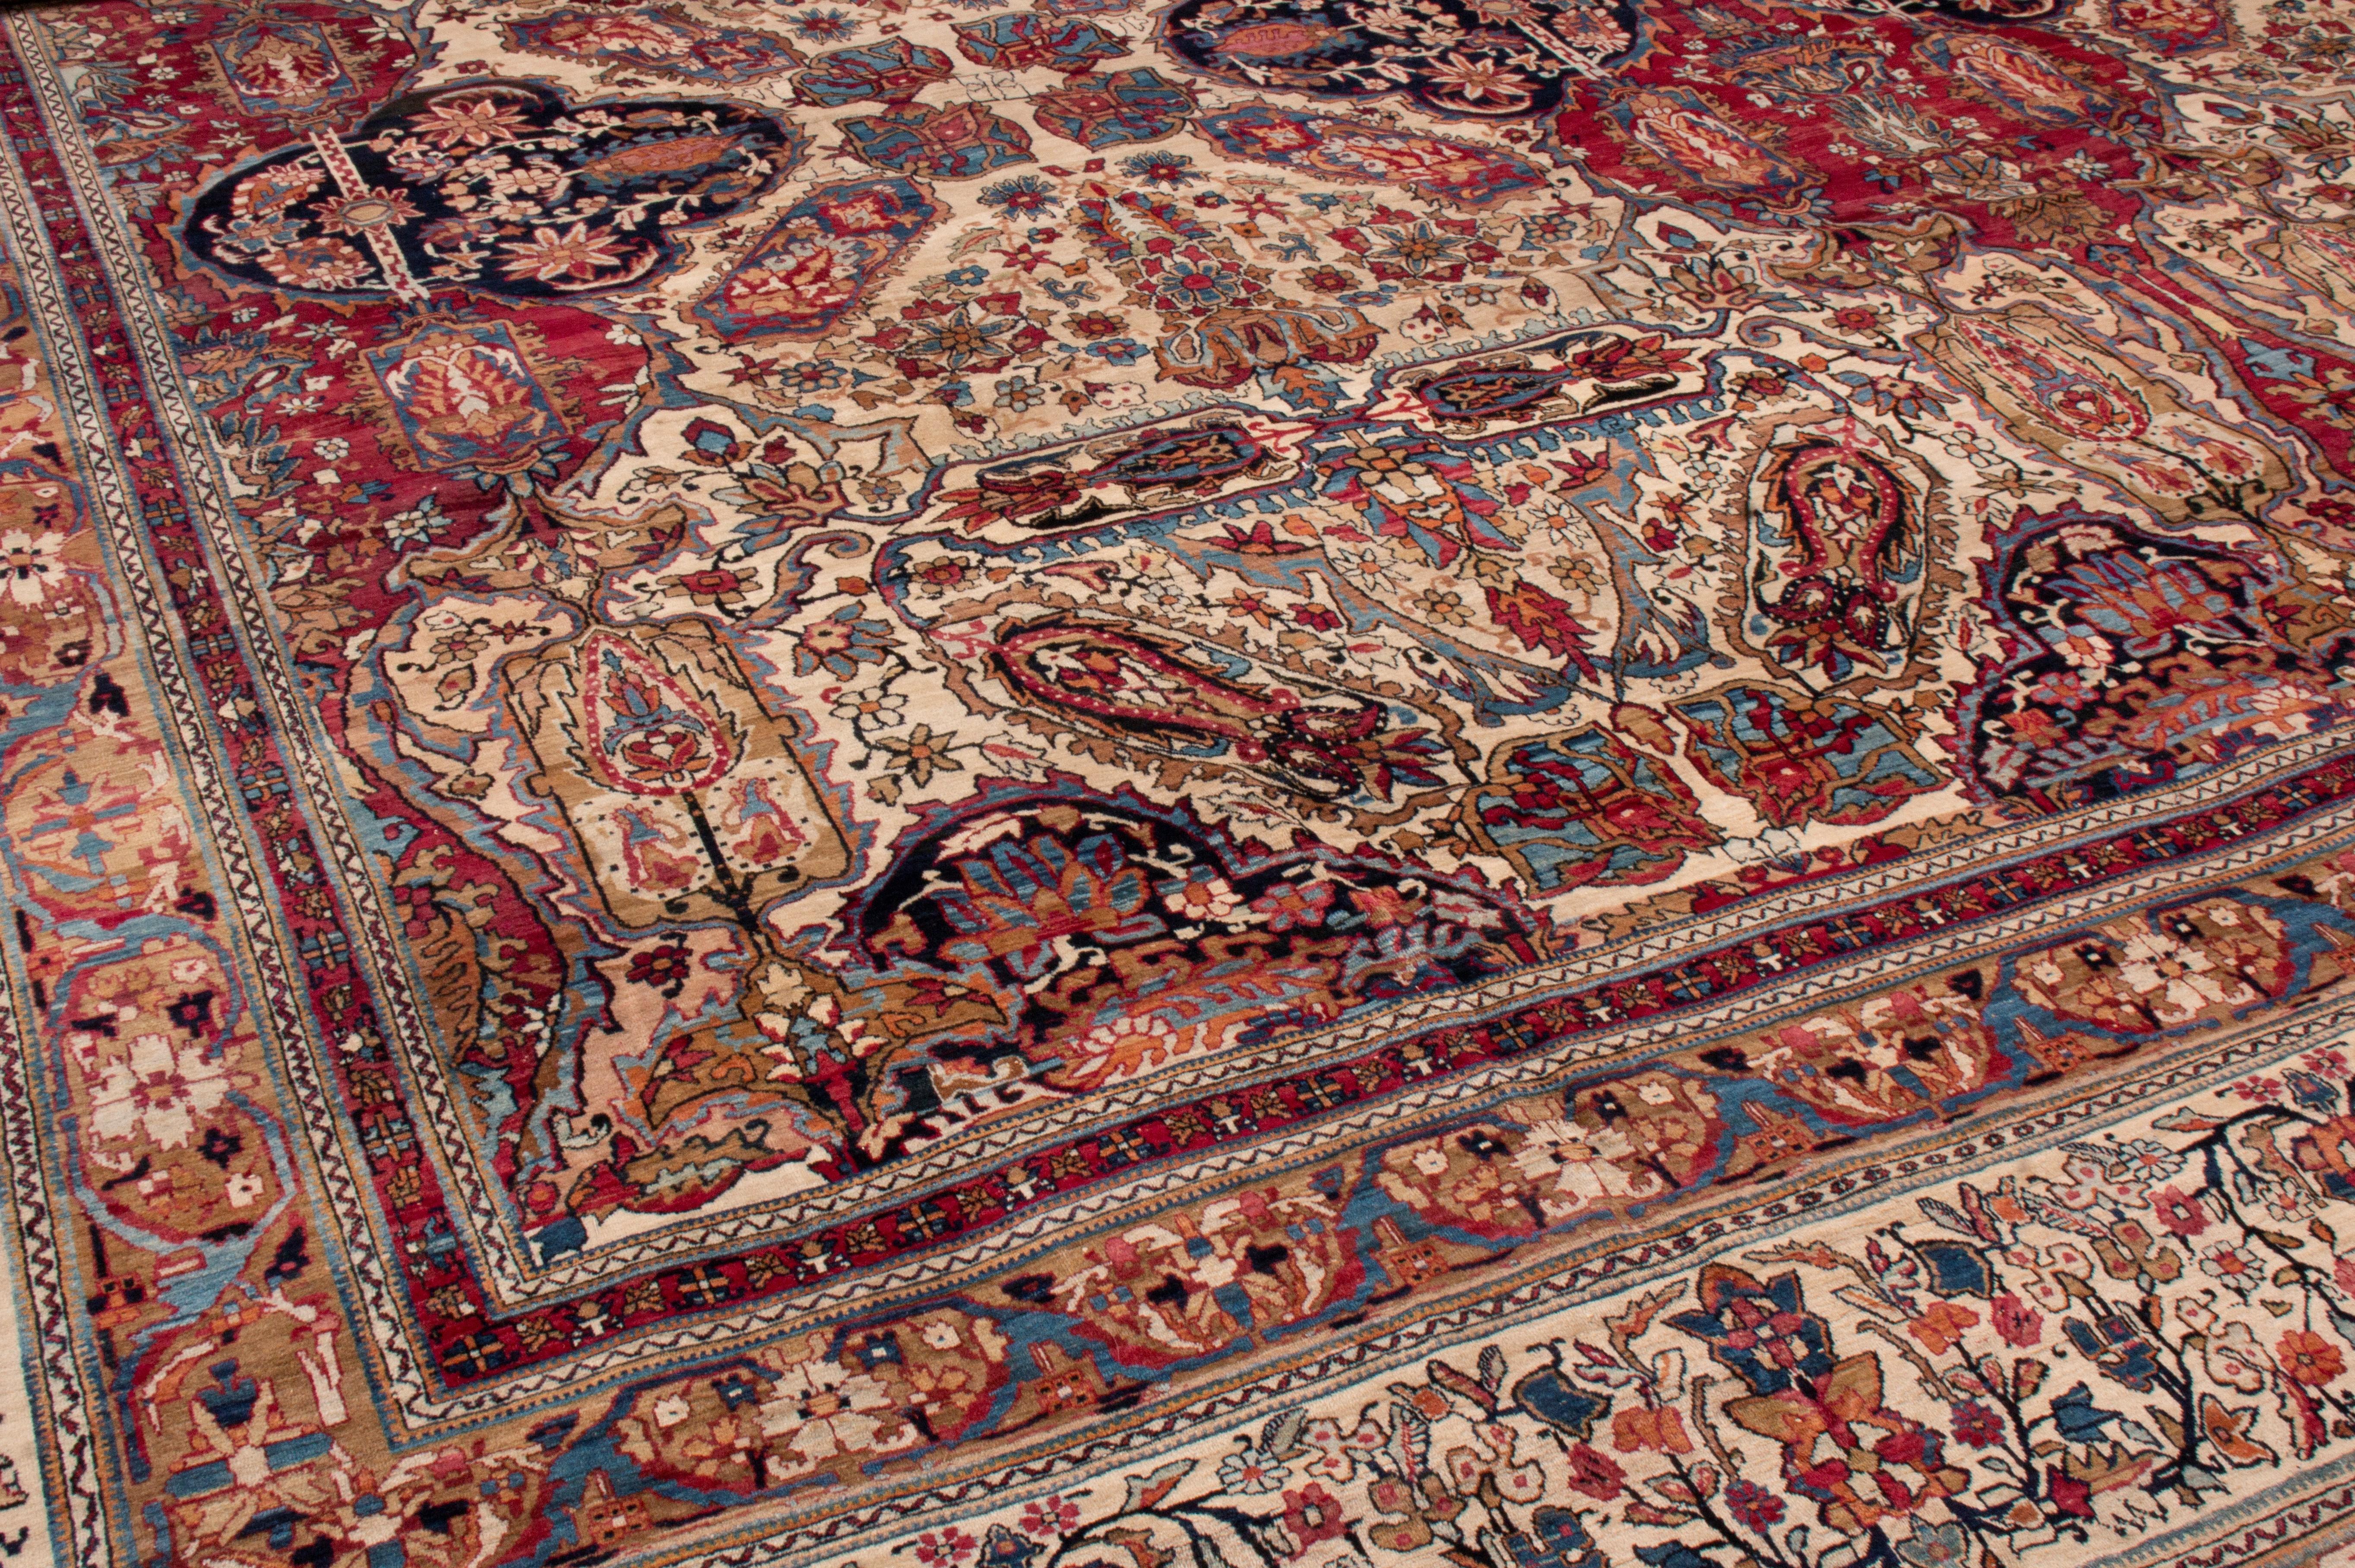 This antique Kerman Lavar Persian floral rug has a unique orientation in its field. From 1880-1900, the graph of the all-over floral field was drawn off-centre, an exceptionally uncommon trait for Kerman Lavar rugs that typically favor centric